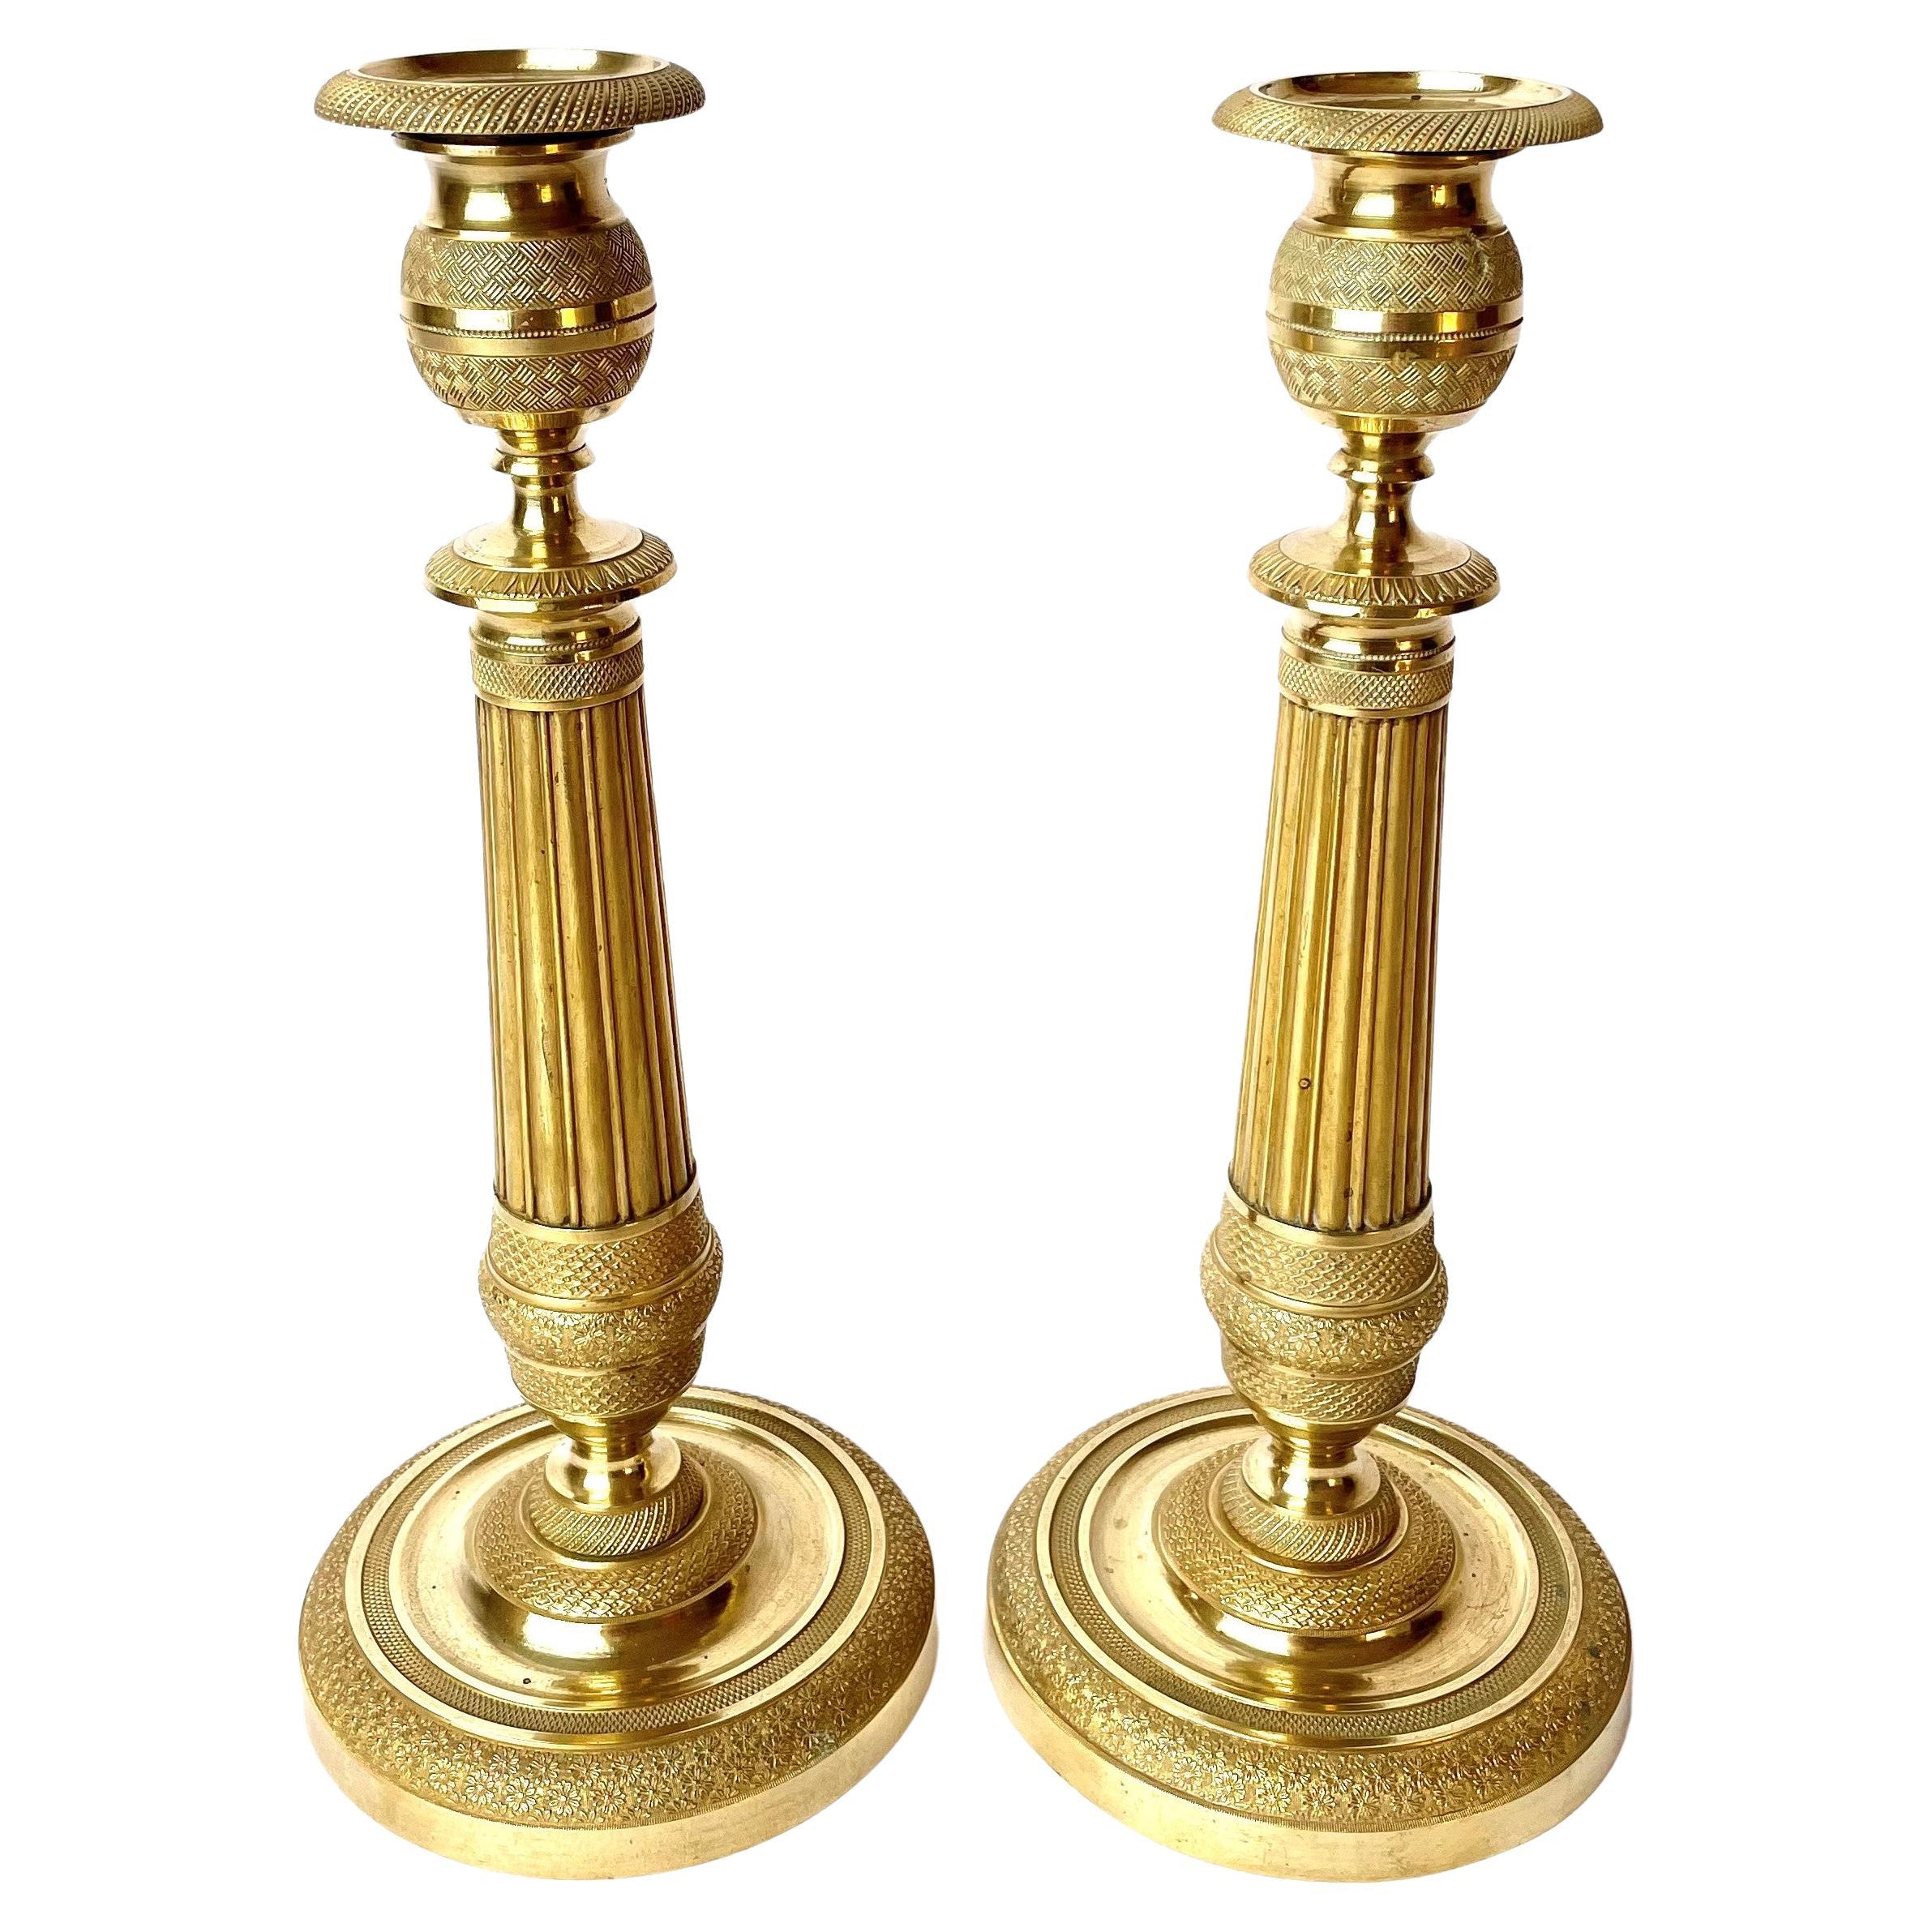 Pair of Empire Gilt Bronze Candle Sticks, French, Early 19th Century